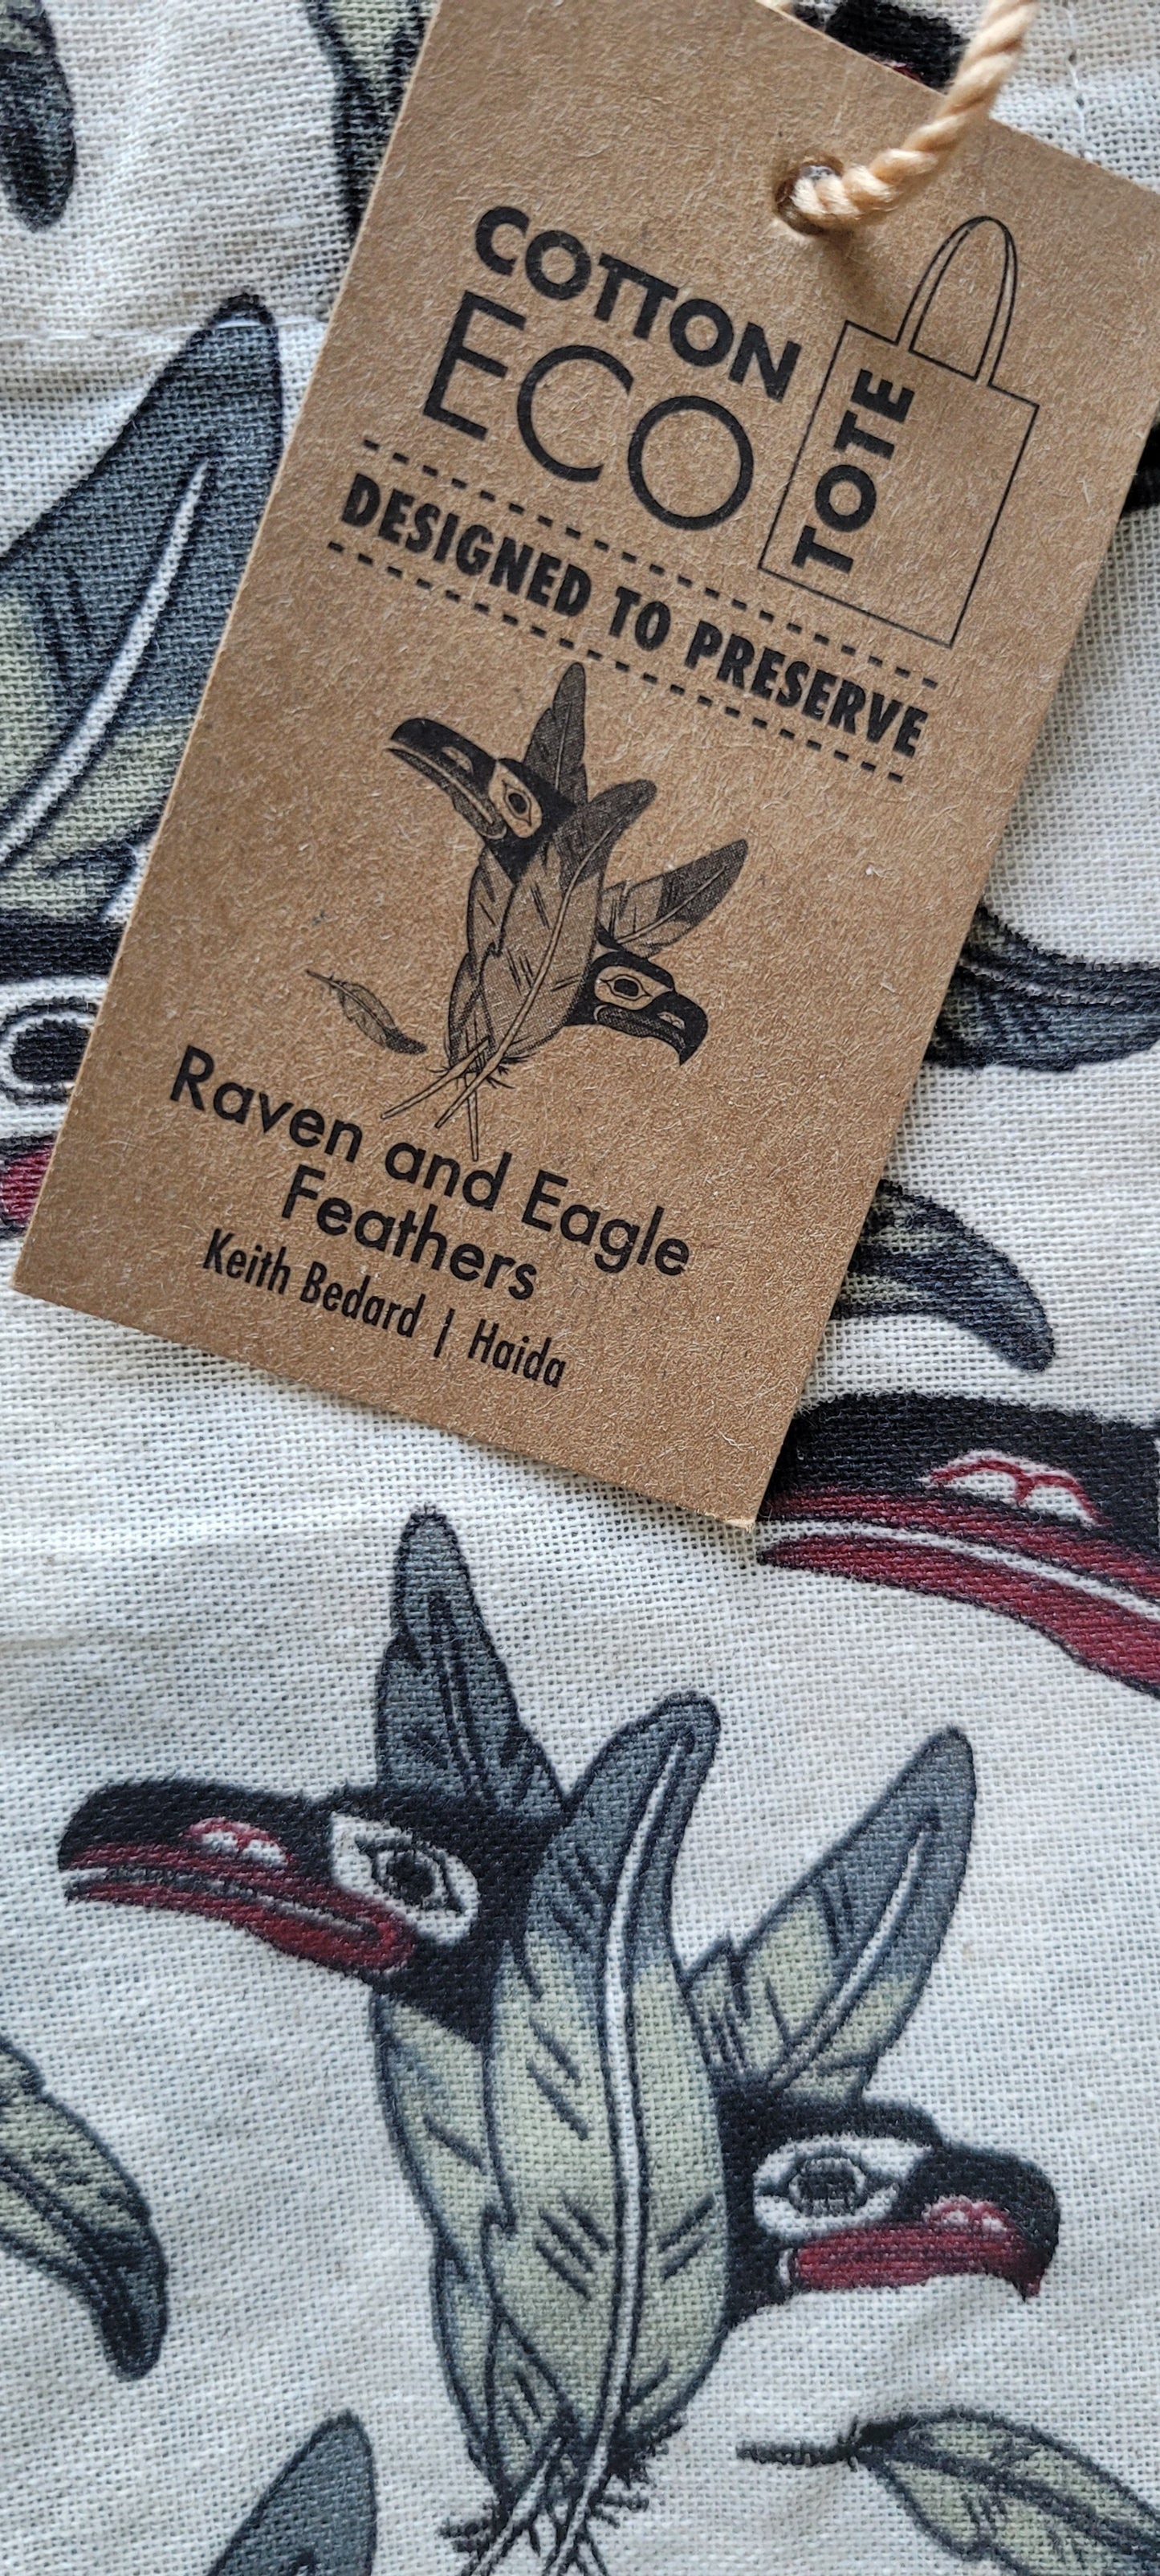 Ravens and Eagle Feathers Cotton Eco Tote by Keith Bedard, Haida